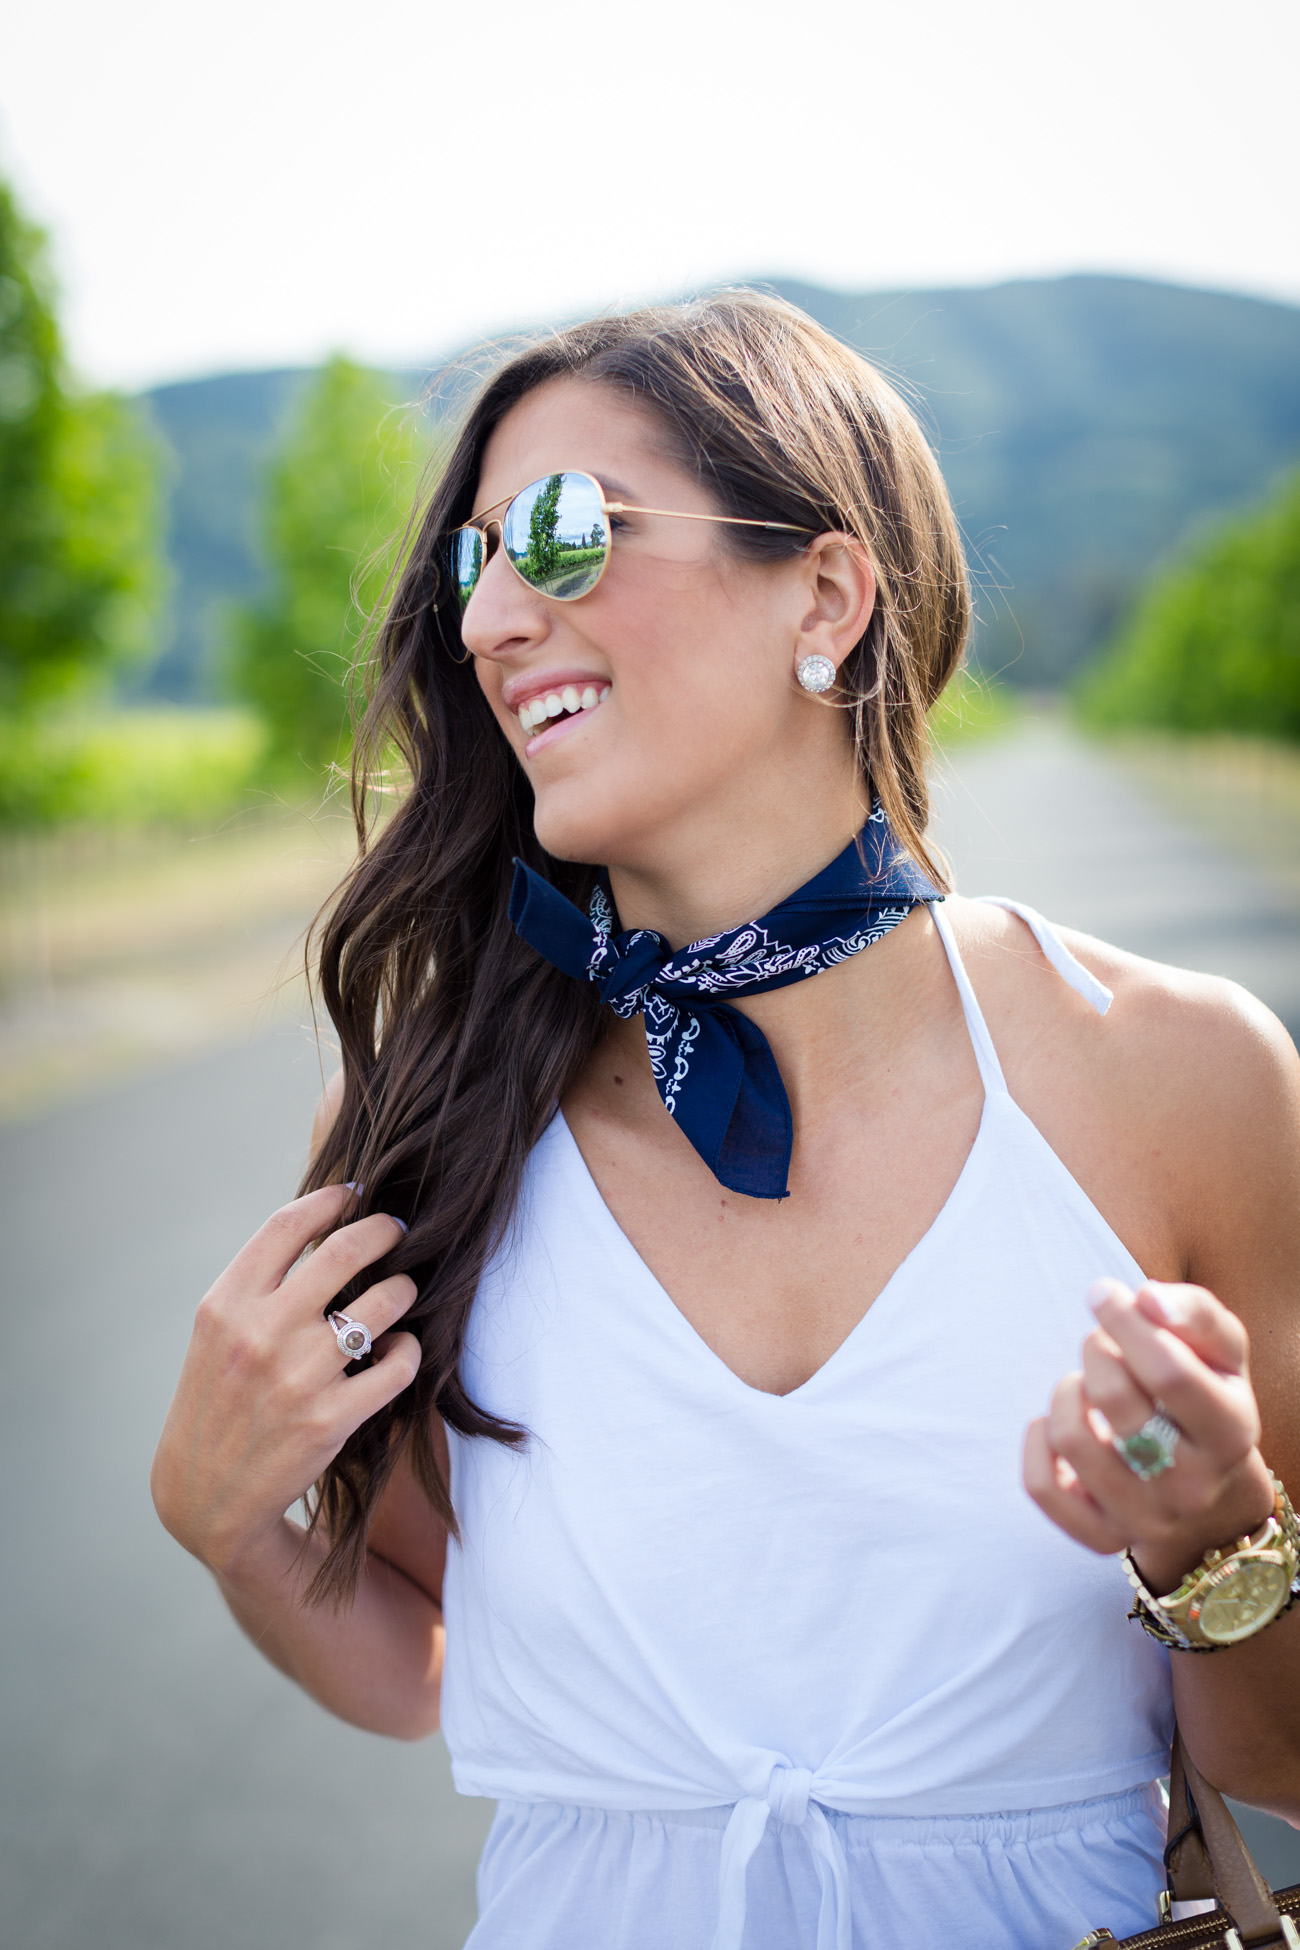 neck handkerchief, white tie halter dress, white dress, little white dress, napa valley, wine country, st helena california, bandana style, bandana around neck, french inspired outfit, casual outfit, cognac sandals, summer fashion, summer style, travel blogger, kentucky fashion blogger, front tie dress // grace wainwright a southern drawl